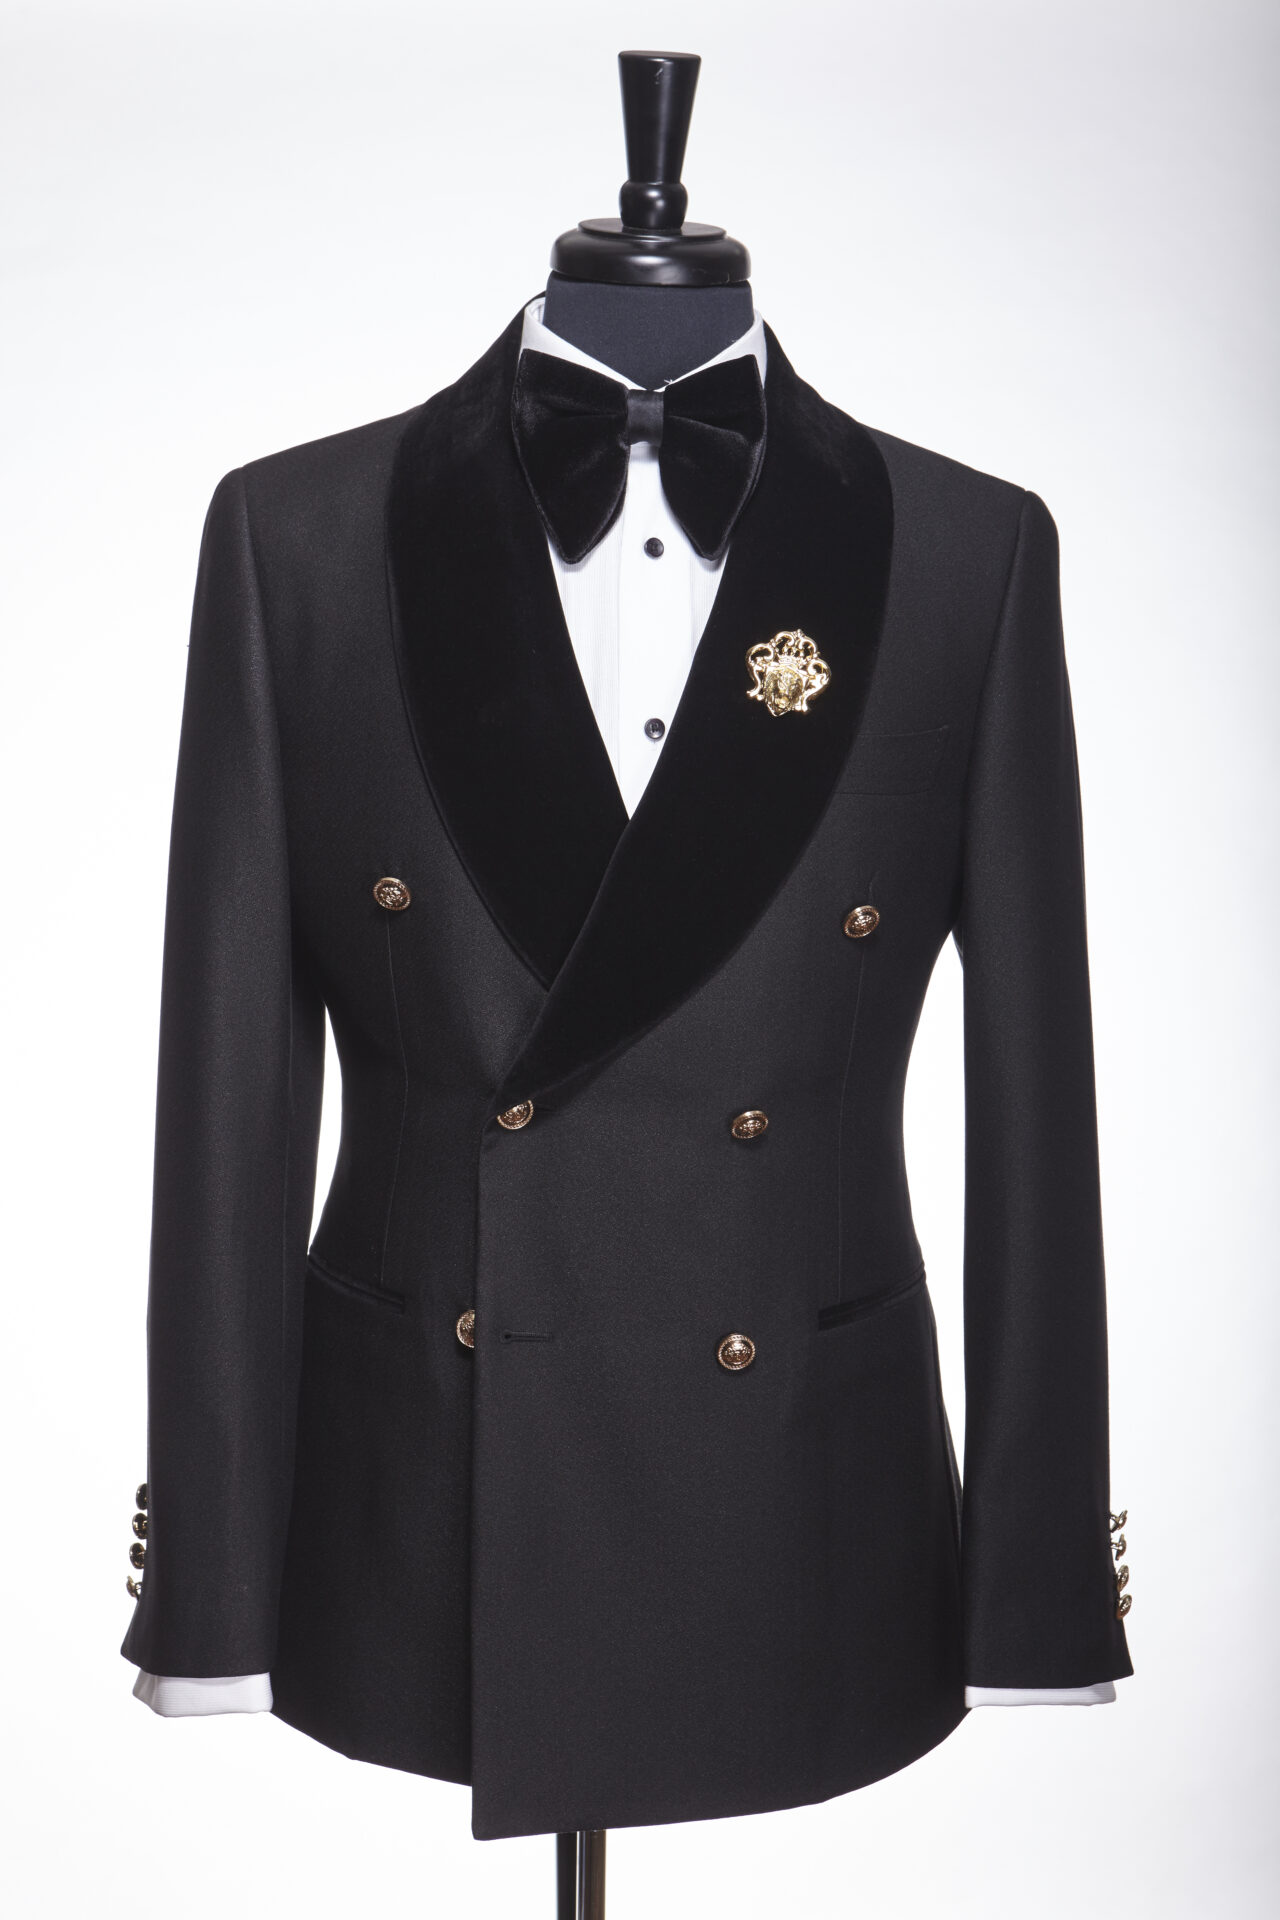 STANLION DOUBLE BREASTED SHAWL VELVET LAPEL WITH GOLD BUTTON - Stanlion